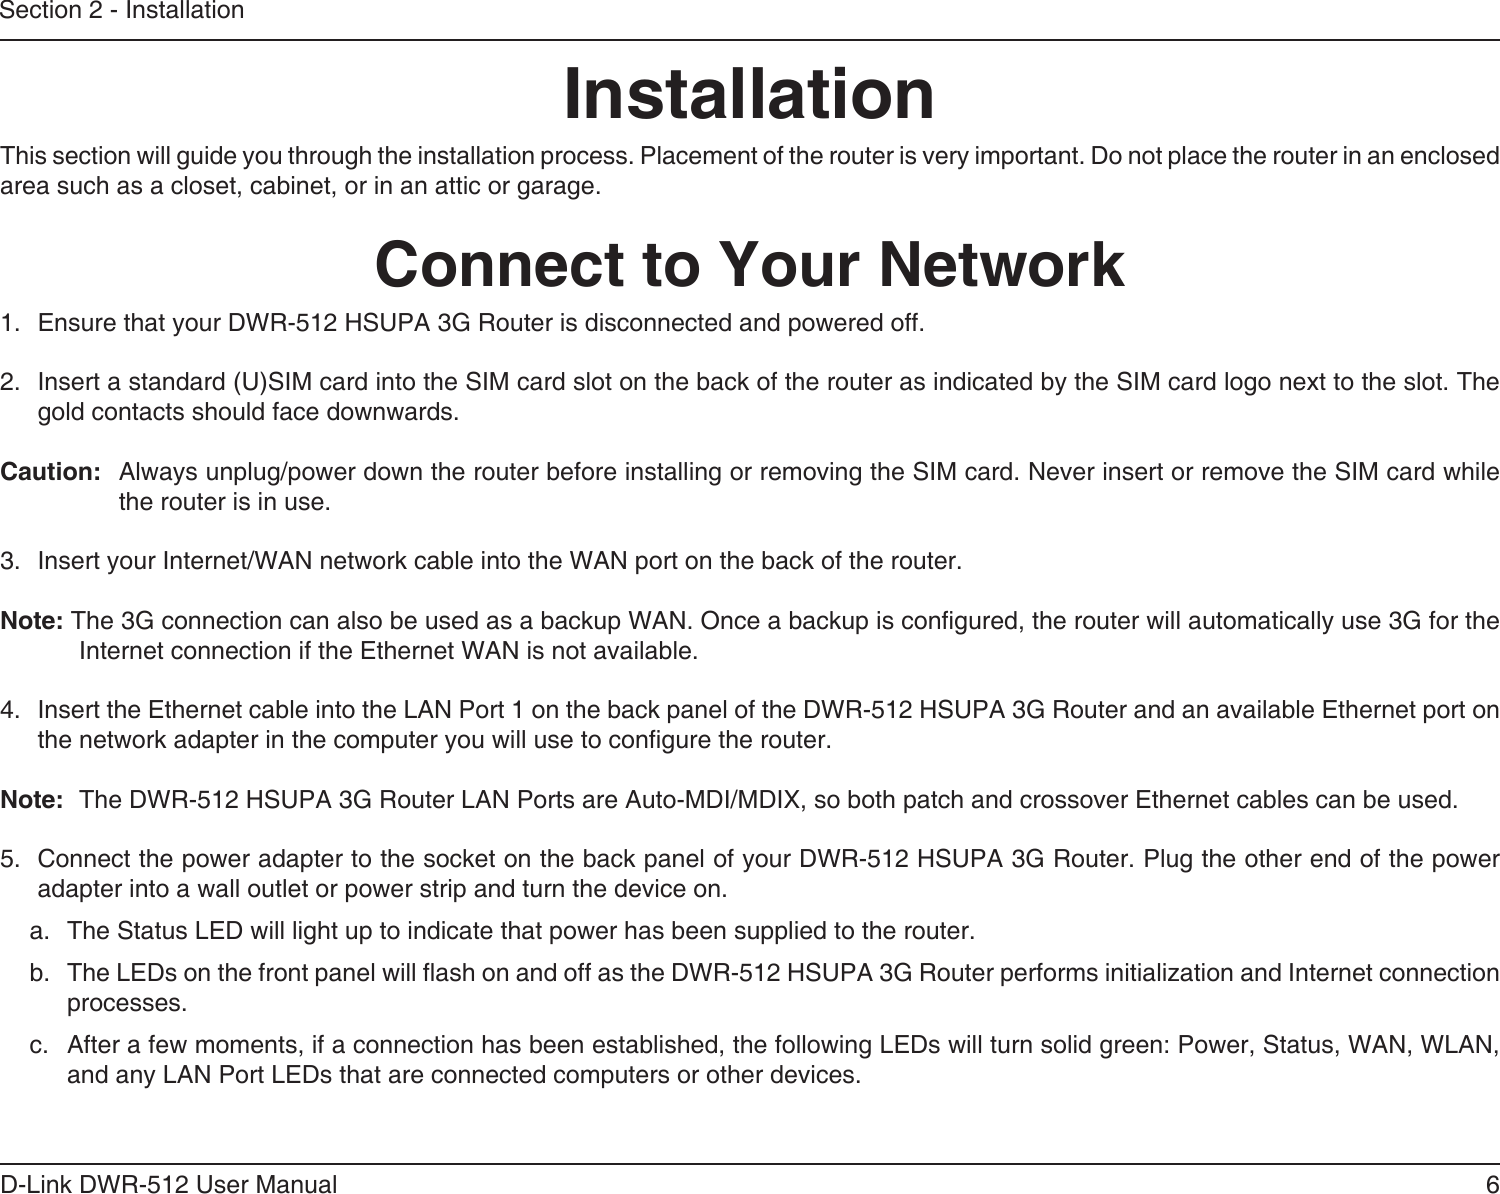 6D-Link DWR-512 User ManualSection 2 - InstallationConnect to Your NetworkInstallationThis section will guide you through the installation process. Placement of the router is very important. Do not place the router in an enclosed area such as a closet, cabinet, or in an attic or garage.1.  Ensure that your DWR-512 HSUPA 3G Router is disconnected and powered off.2.  Insert a standard (U)SIM card into the SIM card slot on the back of the router as indicated by the SIM card logo next to the slot. The gold contacts should face downwards.Caution:Always unplug/power down the router before installing or removing the SIM card. Never insert or remove the SIM card while the router is in use.3.  Insert your Internet/WAN network cable into the WAN port on the back of the router.Note: The 3G connection can also be used as a backup WAN. Once a backup is congured, the router will automatically use 3G for the Internet connection if the Ethernet WAN is not available.4.  Insert the Ethernet cable into the LAN Port 1 on the back panel of the DWR-512 HSUPA 3G Router and an available Ethernet port on the network adapter in the computer you will use to congure the router.Note:The DWR-512 HSUPA 3G Router LAN Ports are Auto-MDI/MDIX, so both patch and crossover Ethernet cables can be used.5.  Connect the power adapter to the socket on the back panel of your DWR-512 HSUPA 3G Router. Plug the other end of the power adapter into a wall outlet or power strip and turn the device on.a.  The Status LED will light up to indicate that power has been supplied to the router.b.  The LEDs on the front panel will ash on and off as the DWR-512 HSUPA 3G Router performs initialization and Internet connection processes.c.  After a few moments, if a connection has been established, the following LEDs will turn solid green: Power, Status, WAN, WLAN, and any LAN Port LEDs that are connected computers or other devices.